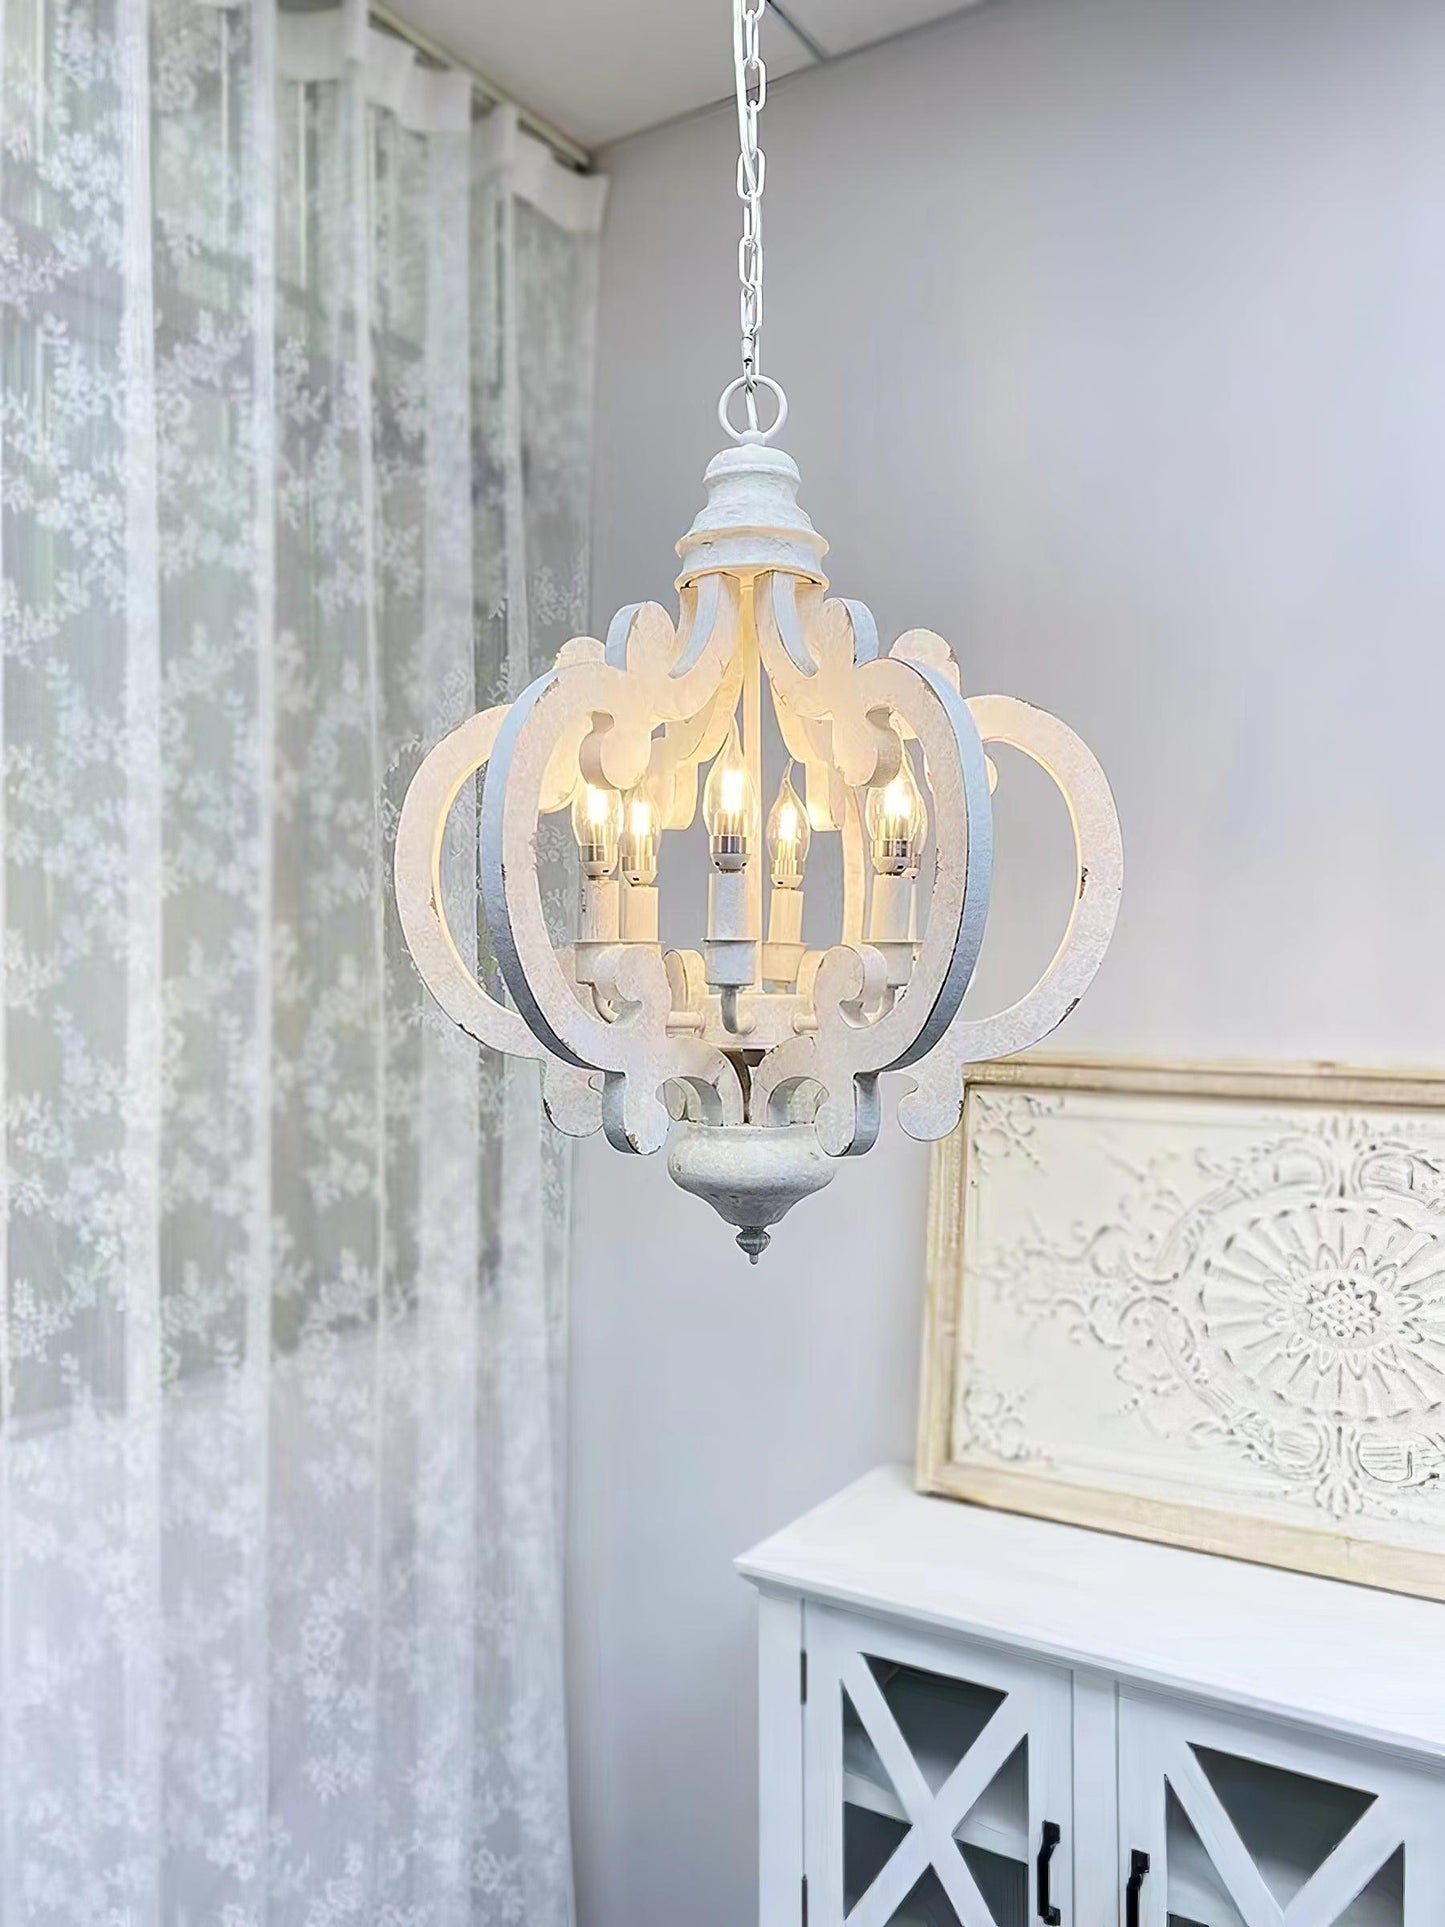 Antique White Style Chandelier